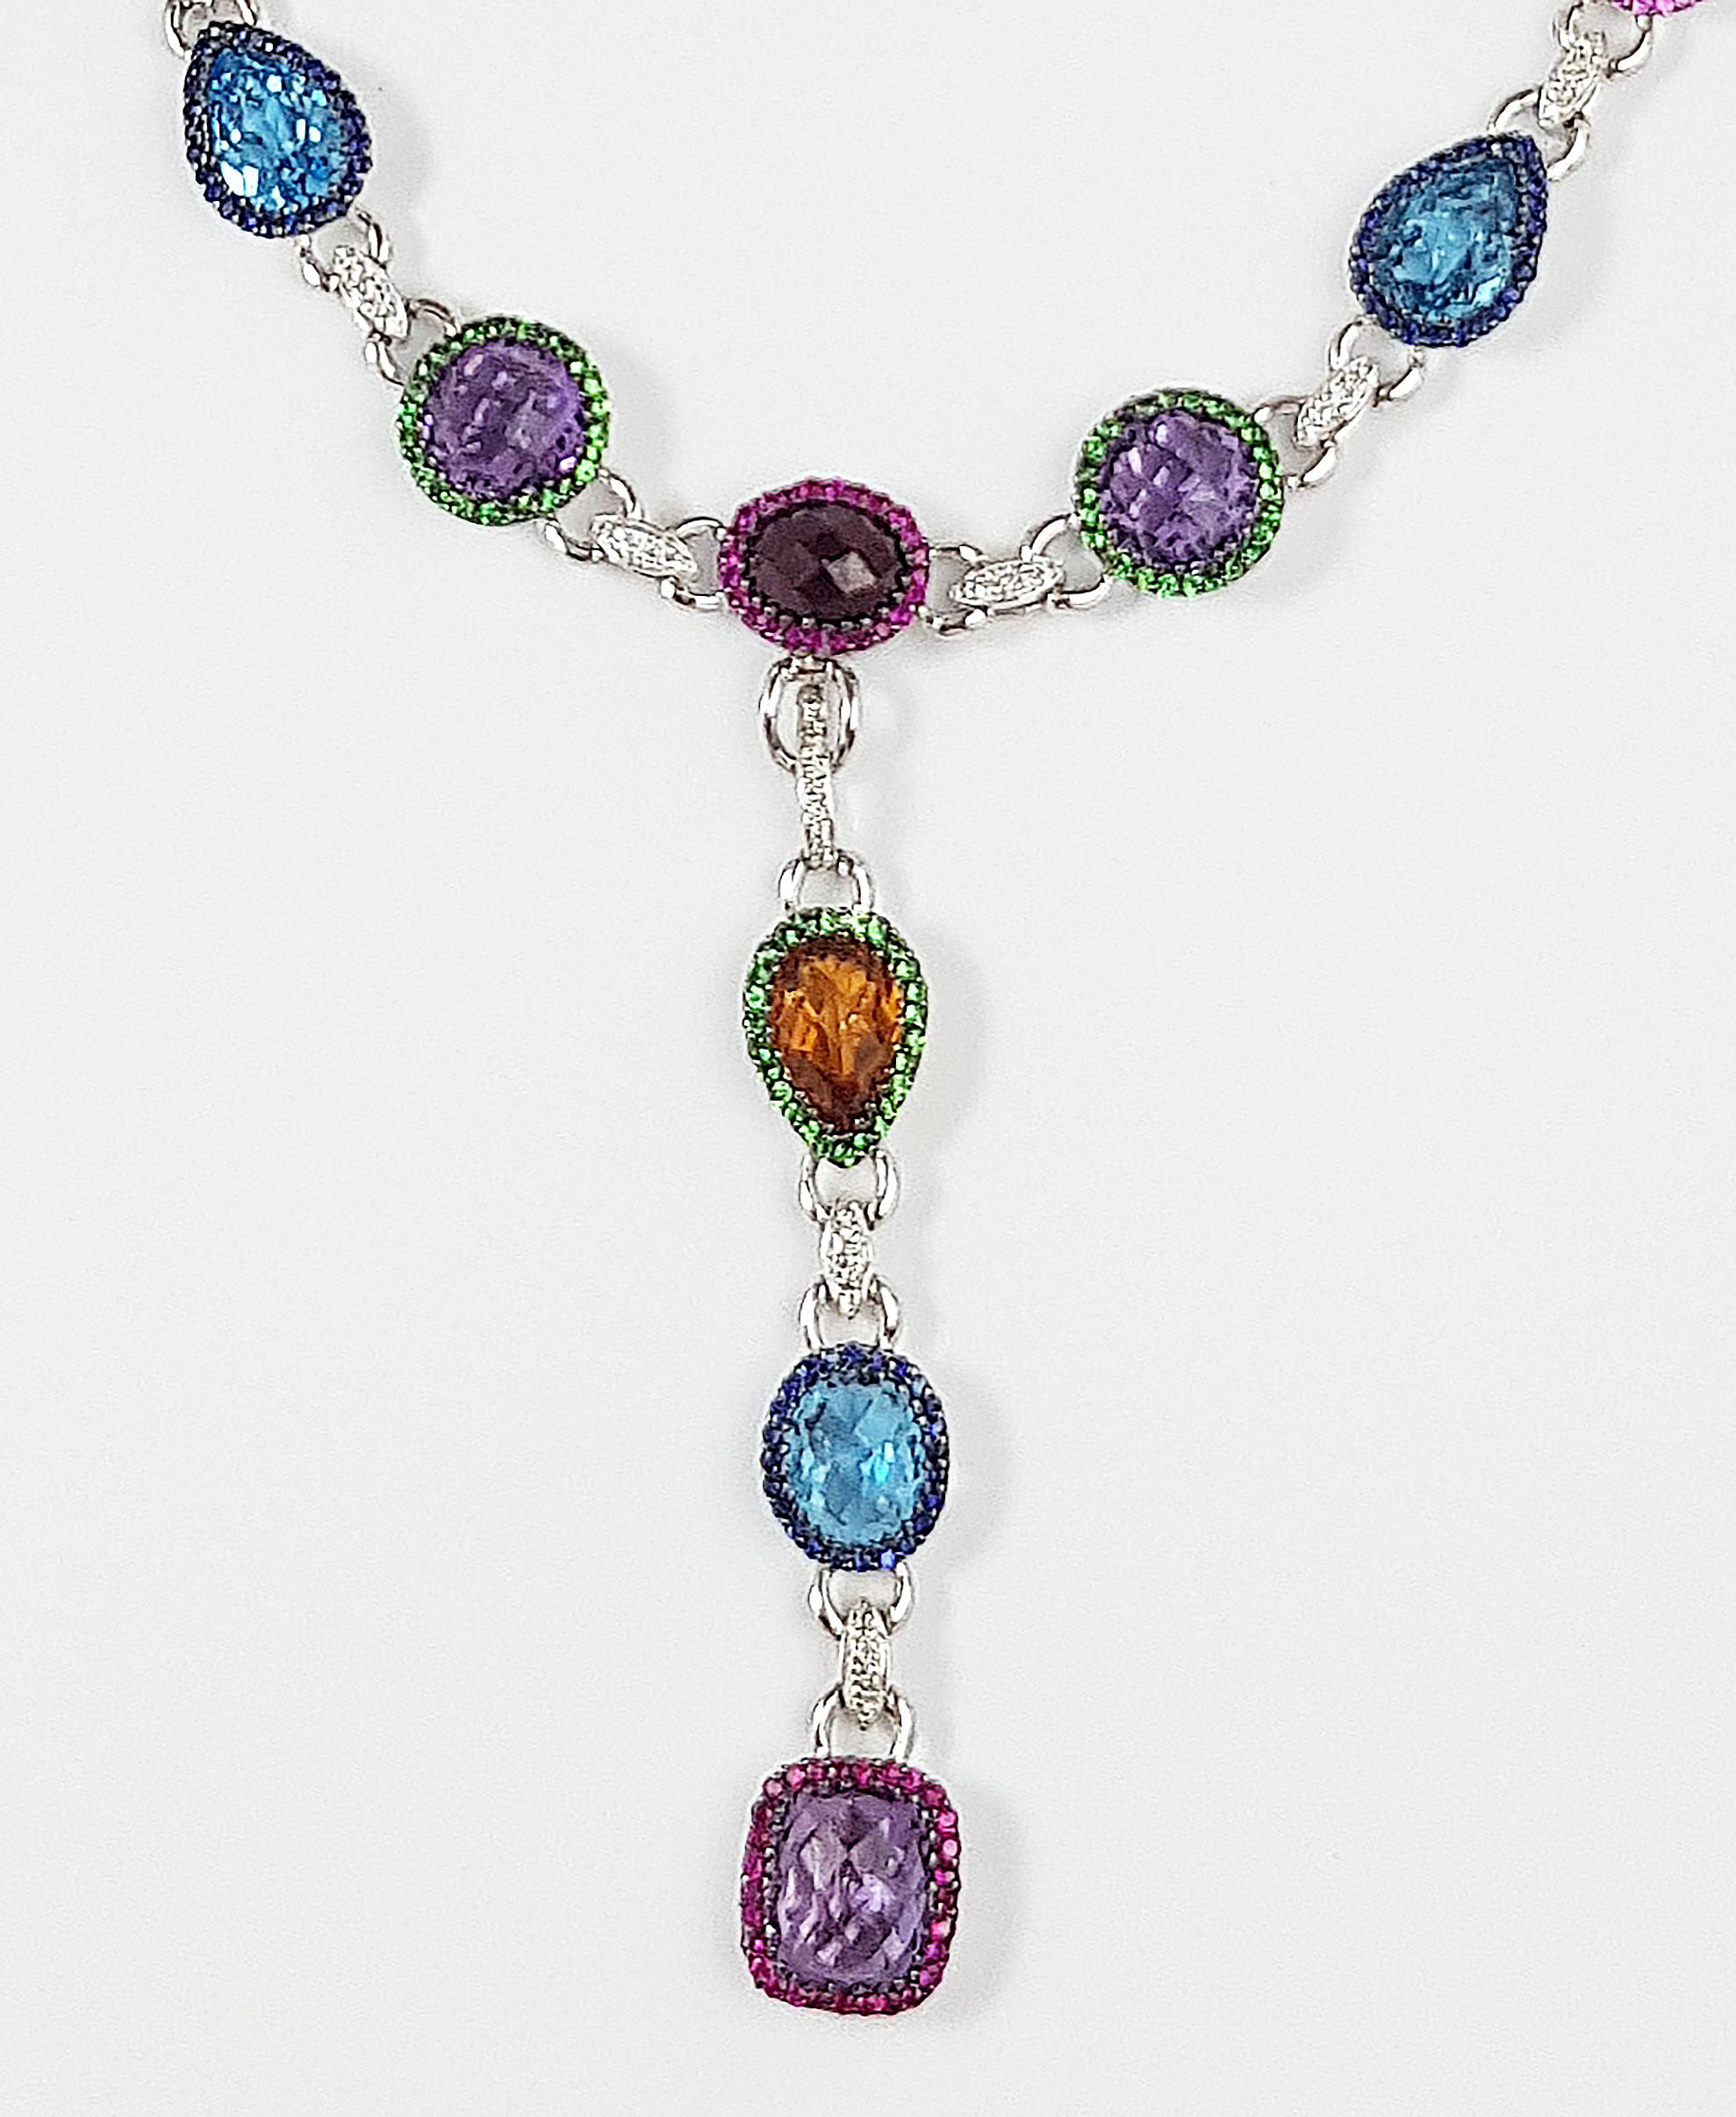 Assorted Colour Semi- Precious Gem Stones 43.75 carats with Ruby, Blue Sapphire, Fancy Sapphire and Tsavorite 4.69 carats and Diamond 0.46 carat Necklace set in 18 Karat White Gold Settings

Depth:  6.2 cm 
Length: 40 cm
Total Weight: 46 grams

